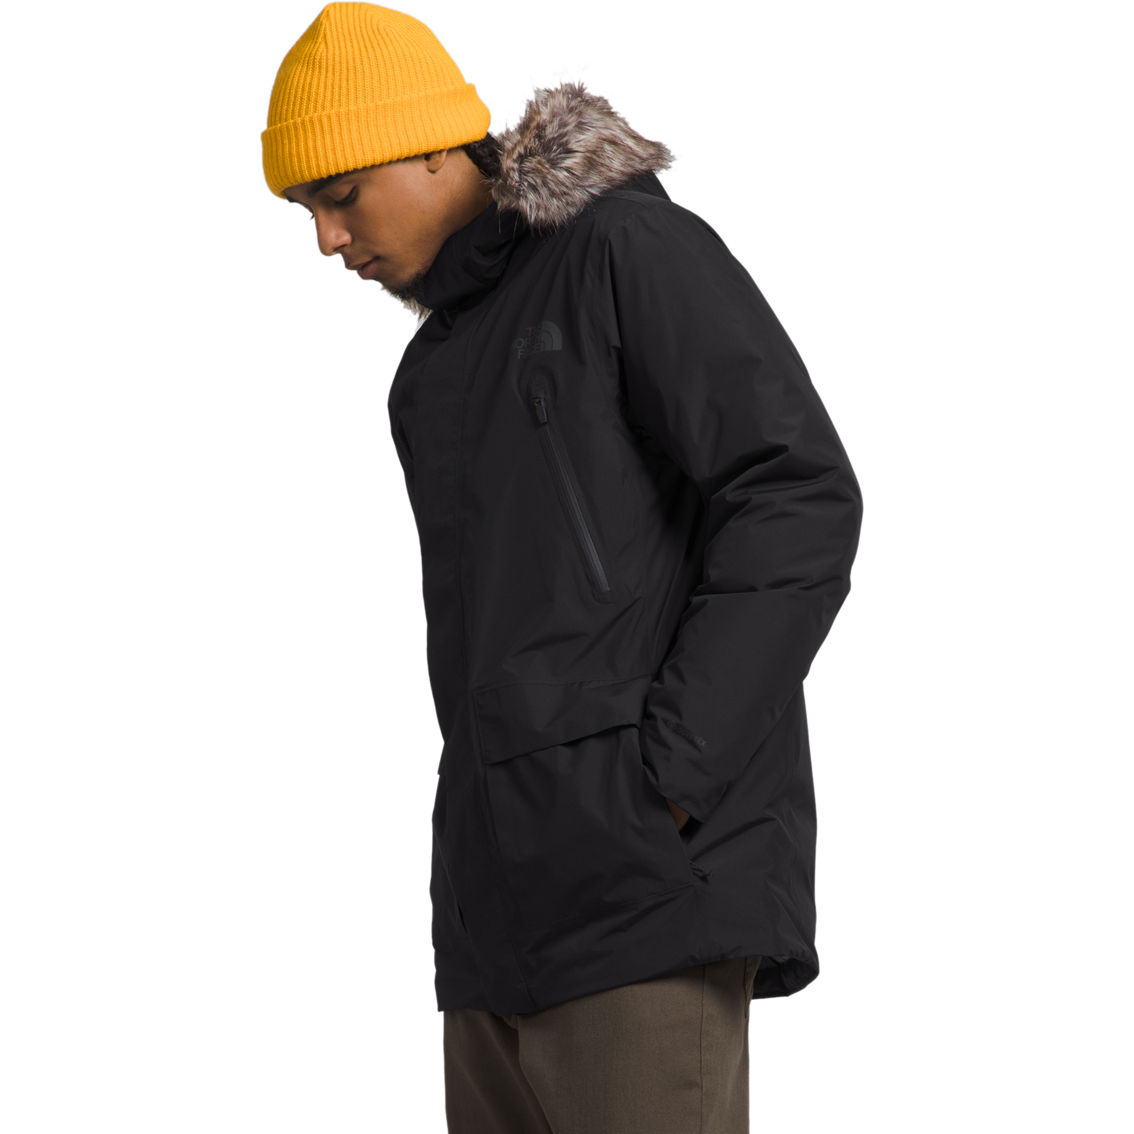 The North Face Arctic Parka GTX Jacket - Image 3 of 6